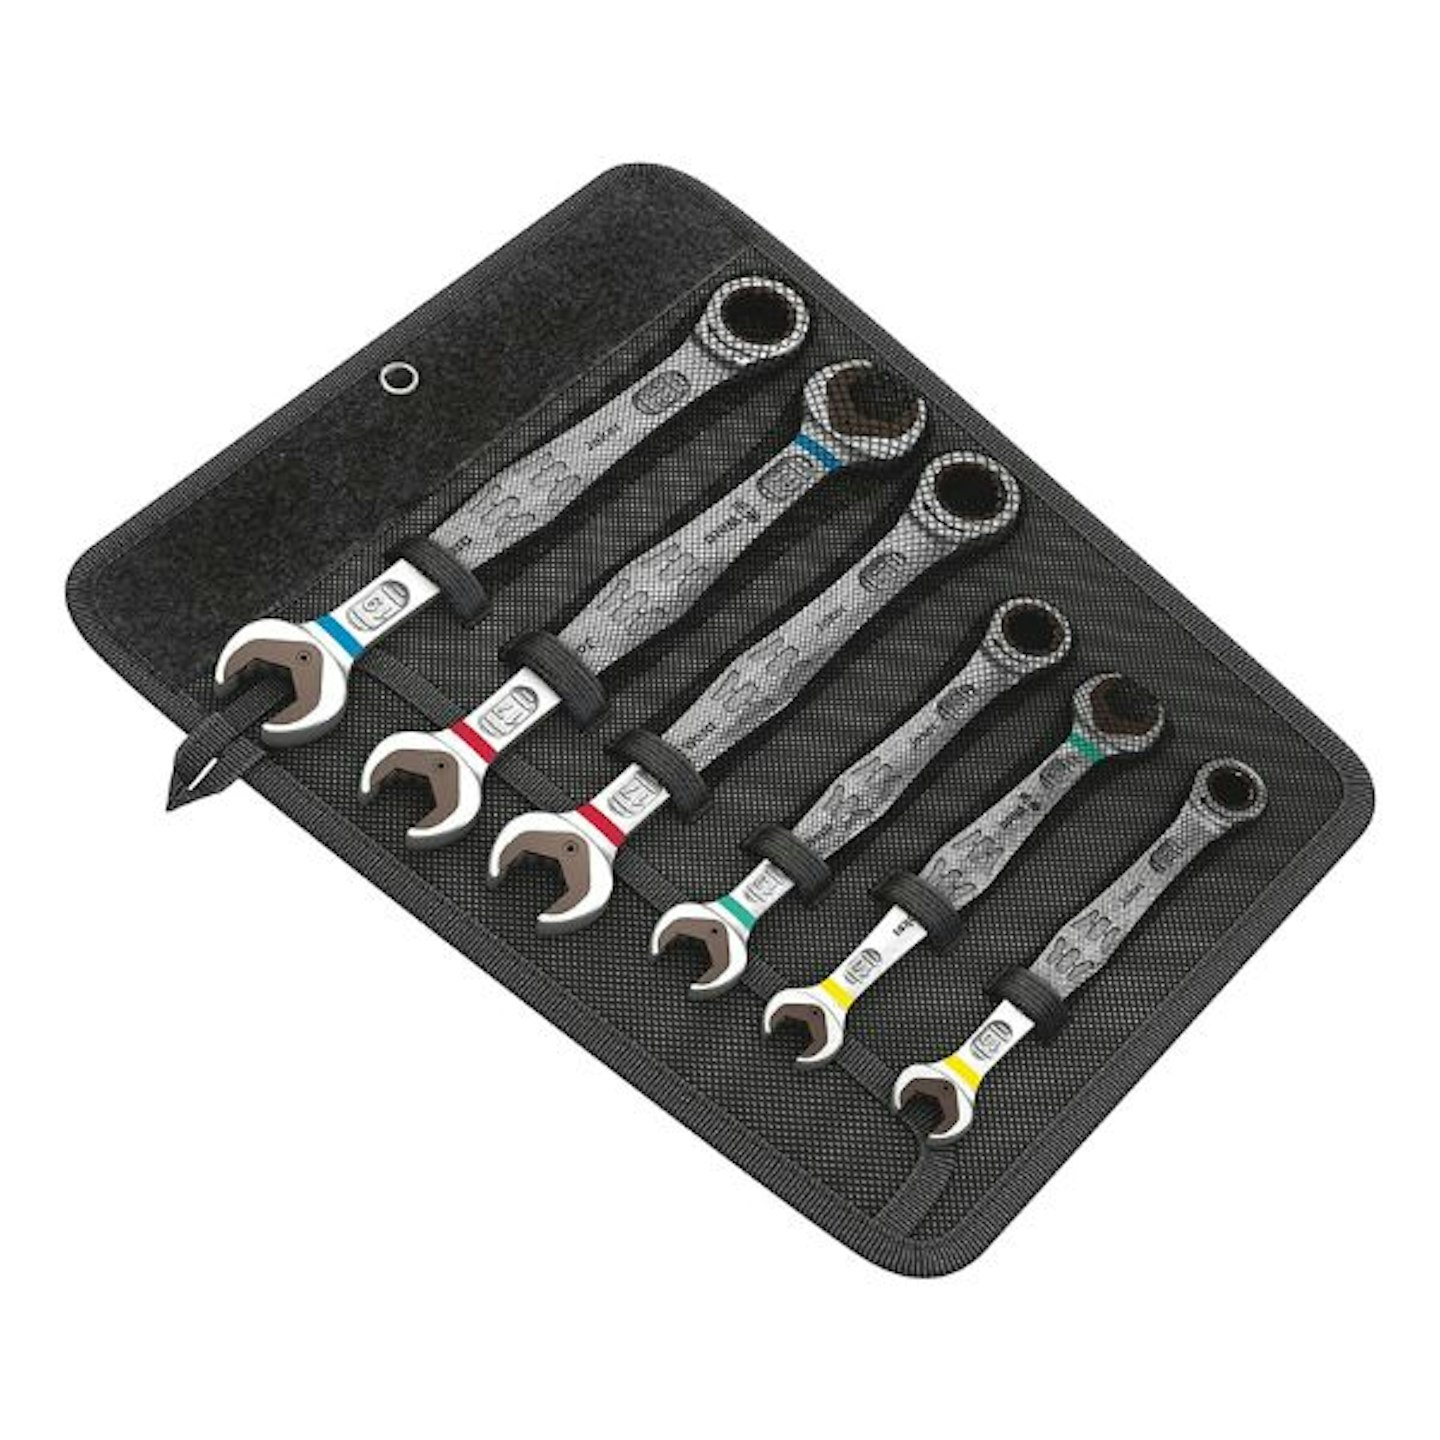 Wera Joker Combination Double Open-Ended Wrench Set